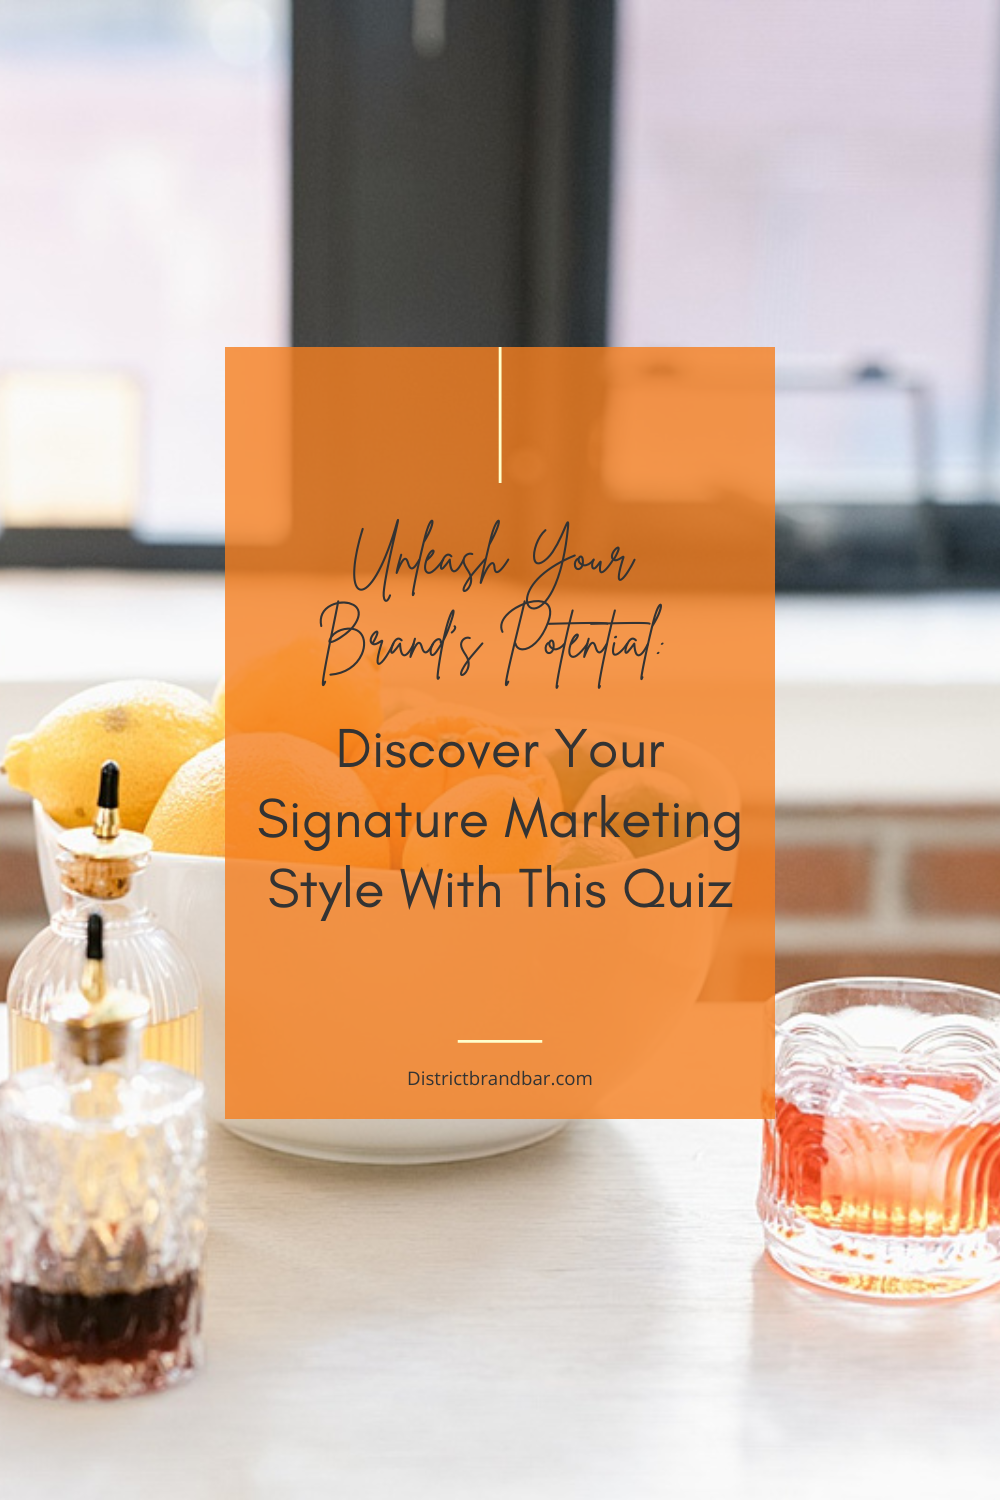 Unleash Your Brand's Potential: Discover Your Signature Marketing Style with This Quiz